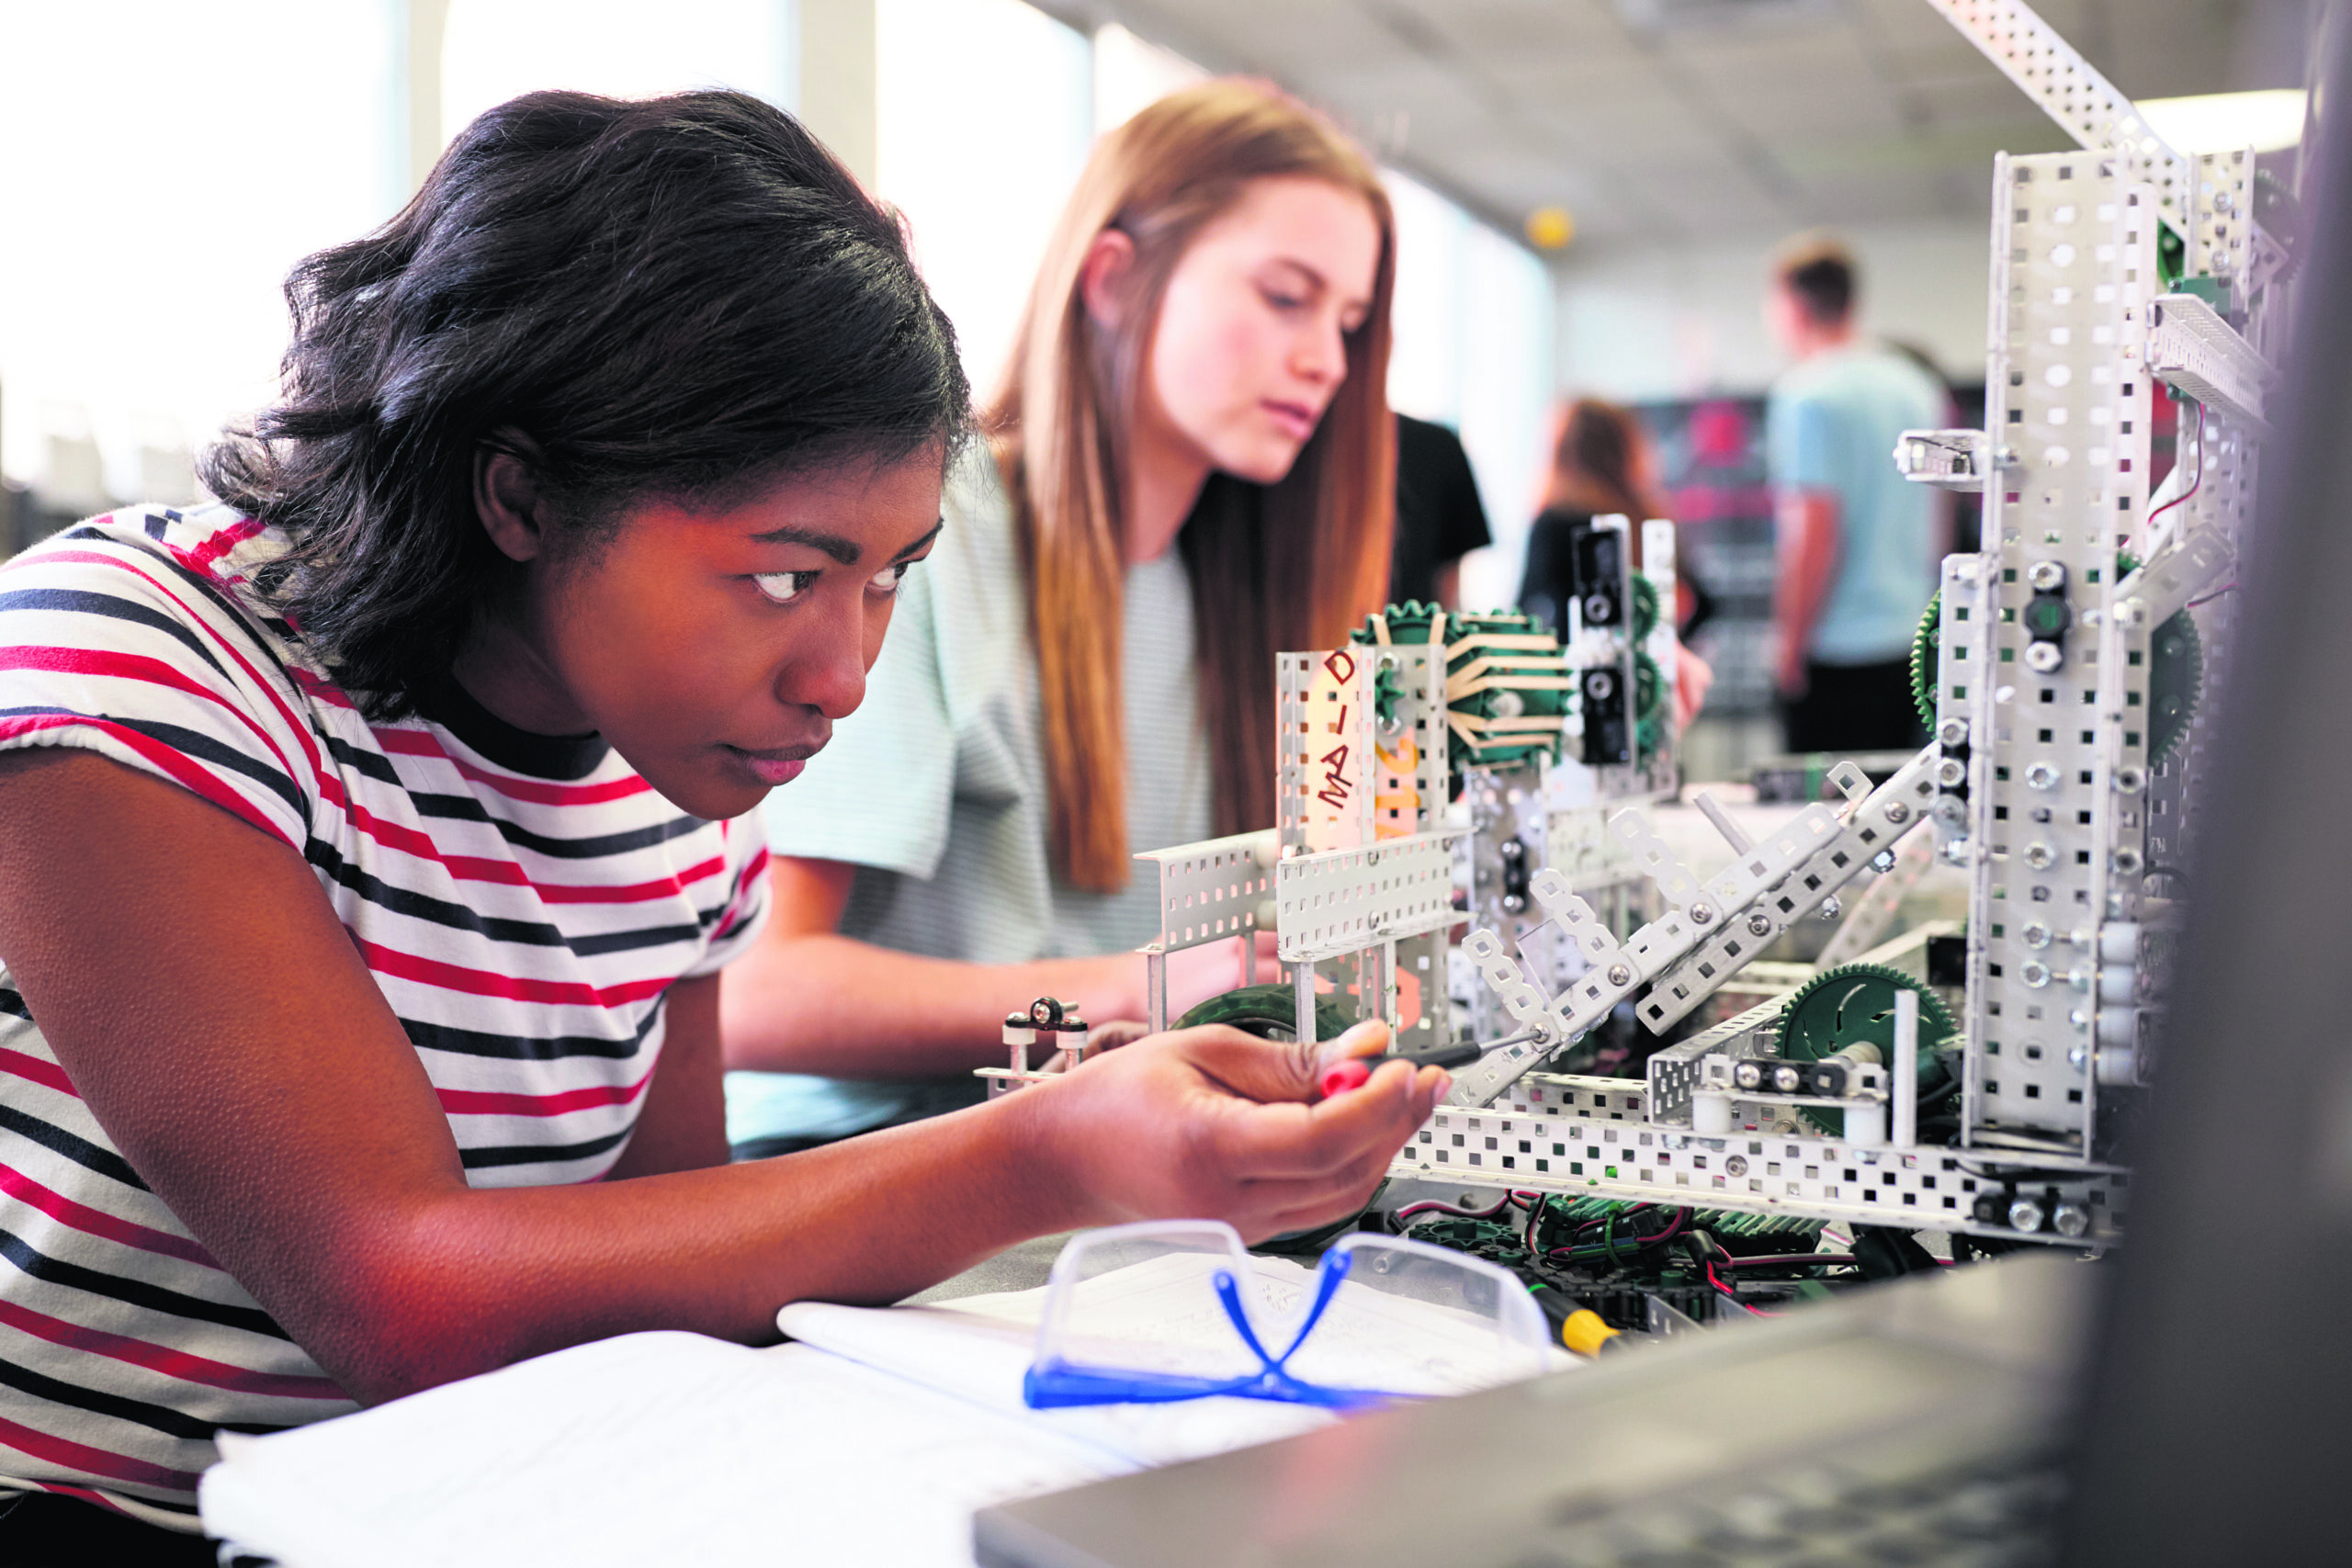 Helping create next generation of scientists and engineers